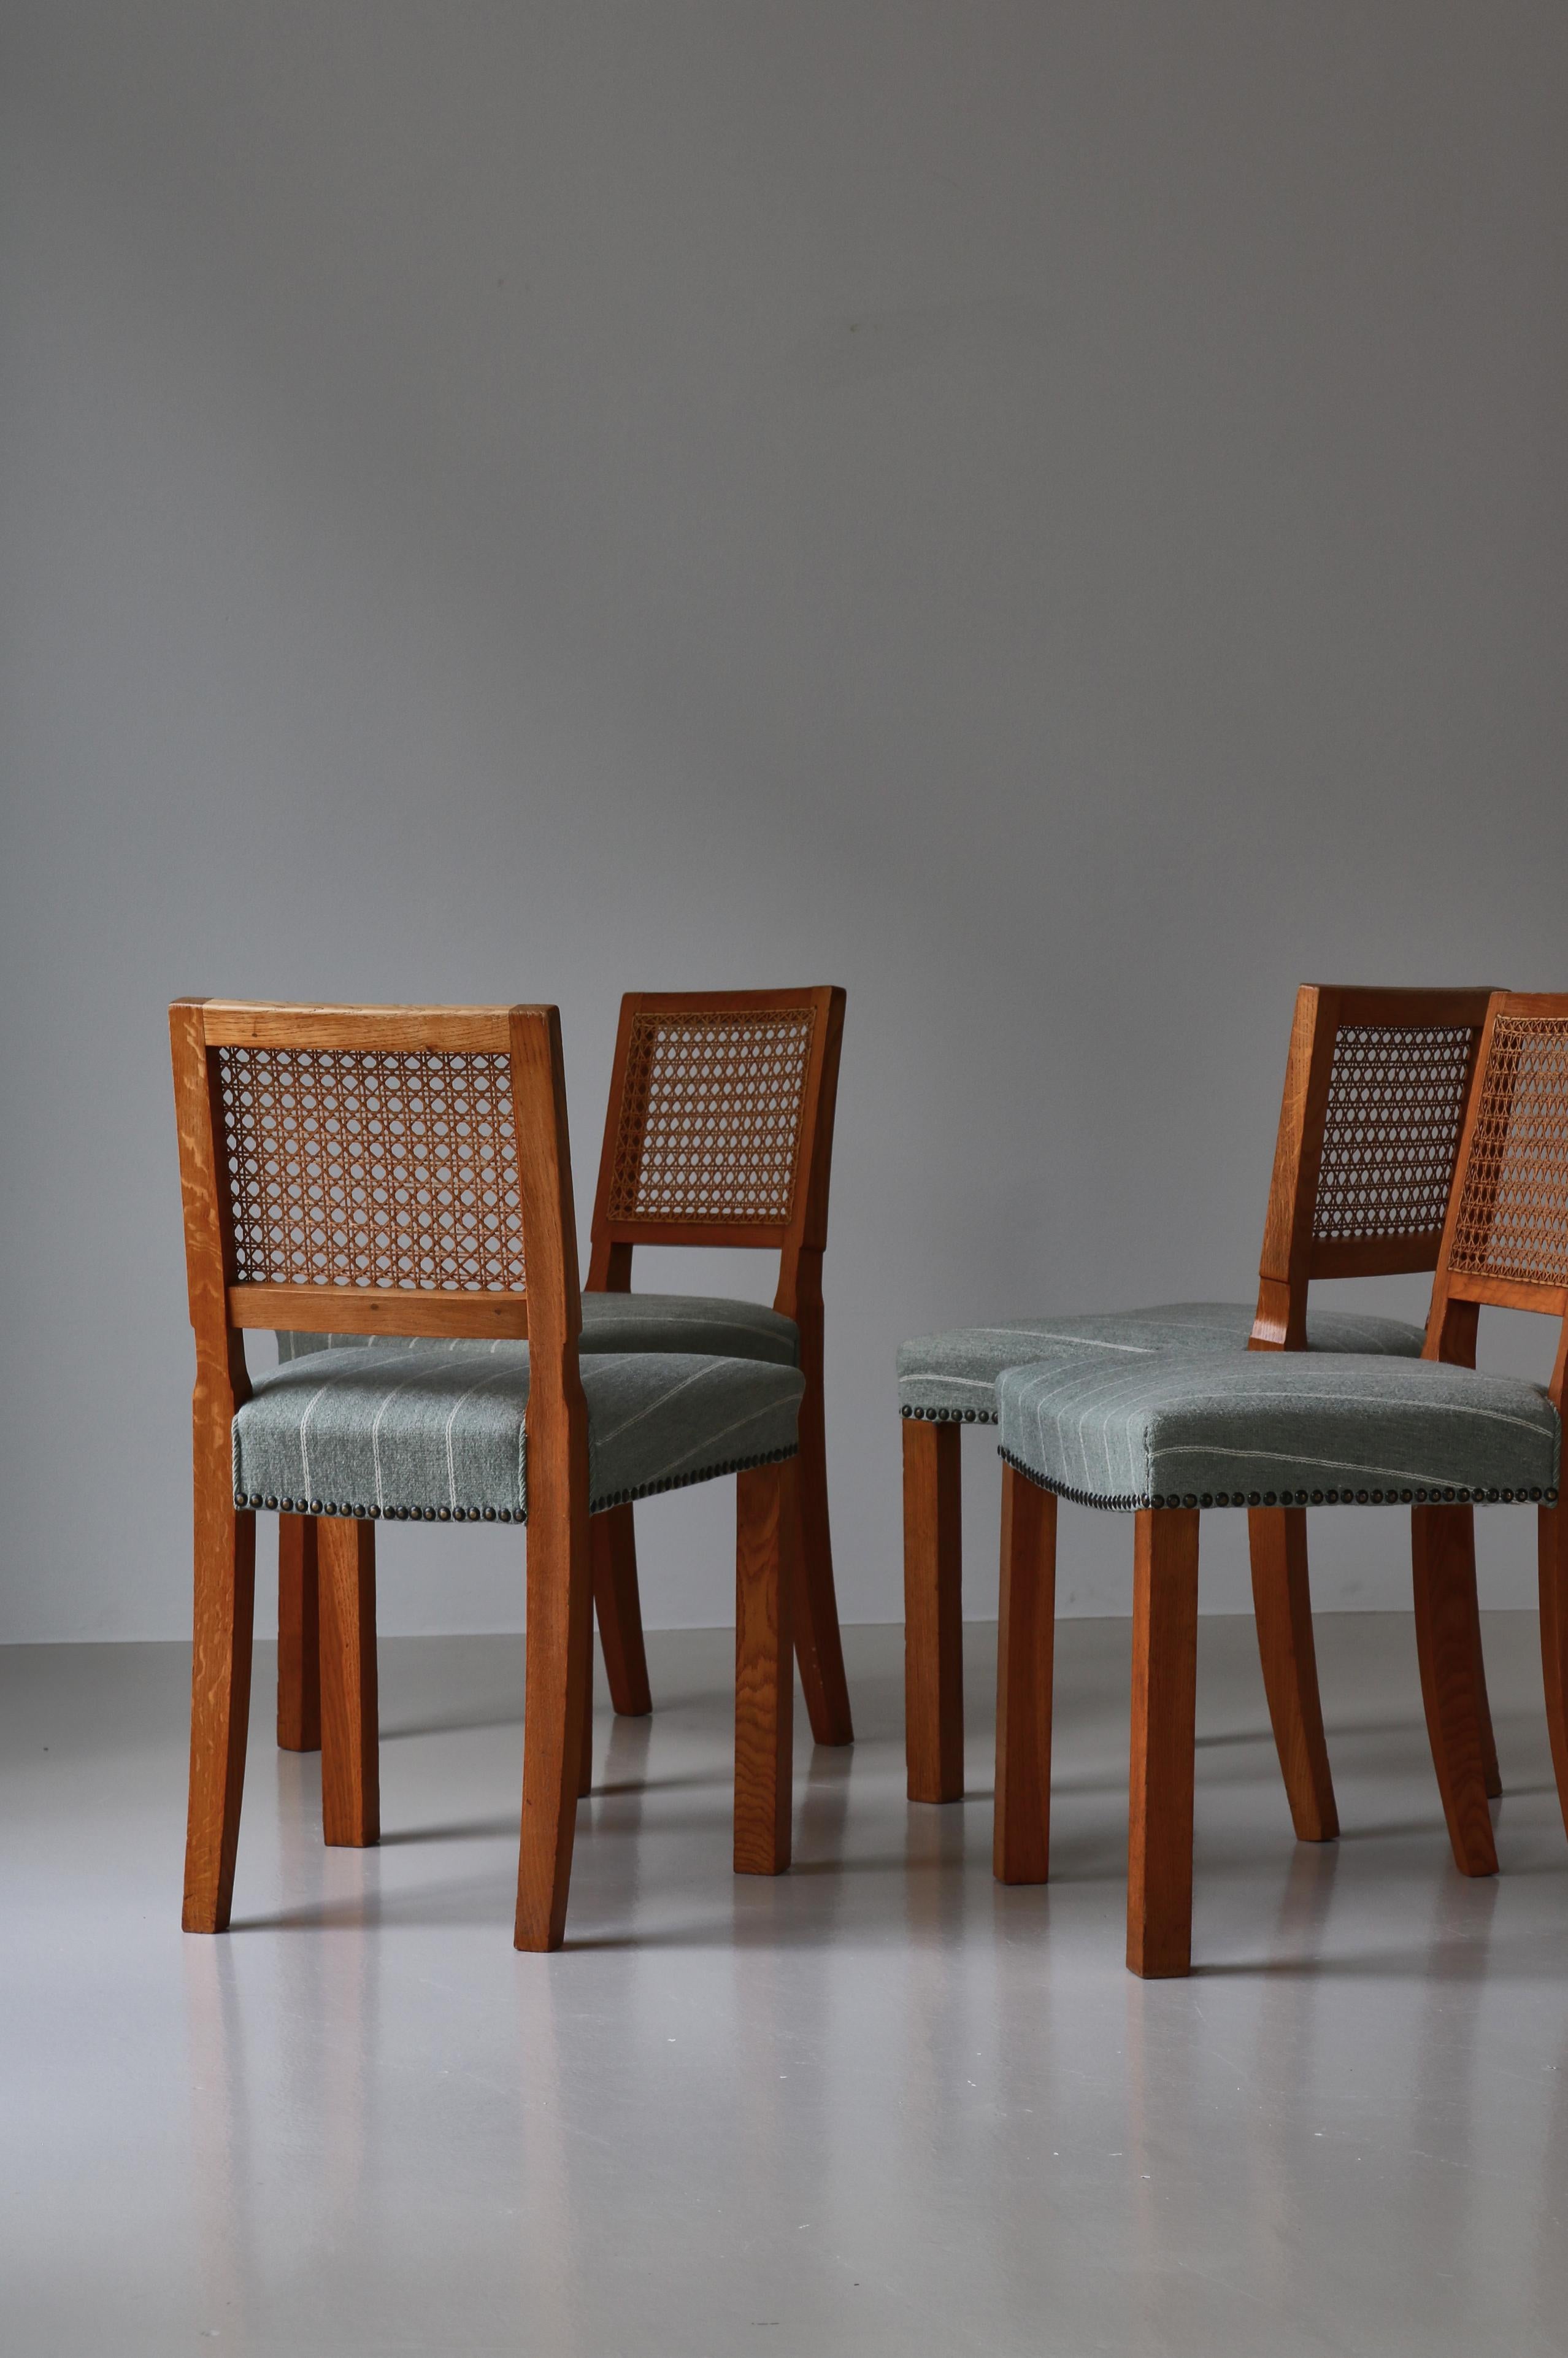 Beautiful set of 4 Danish Modern dining chairs in patinated oak & cane. The chairs were made in Denmark in the 1940s by a Danish cabinetmaker in the tradition of Kaare Klint. They are made from beautiful Scandinavian solid oak and the backs are